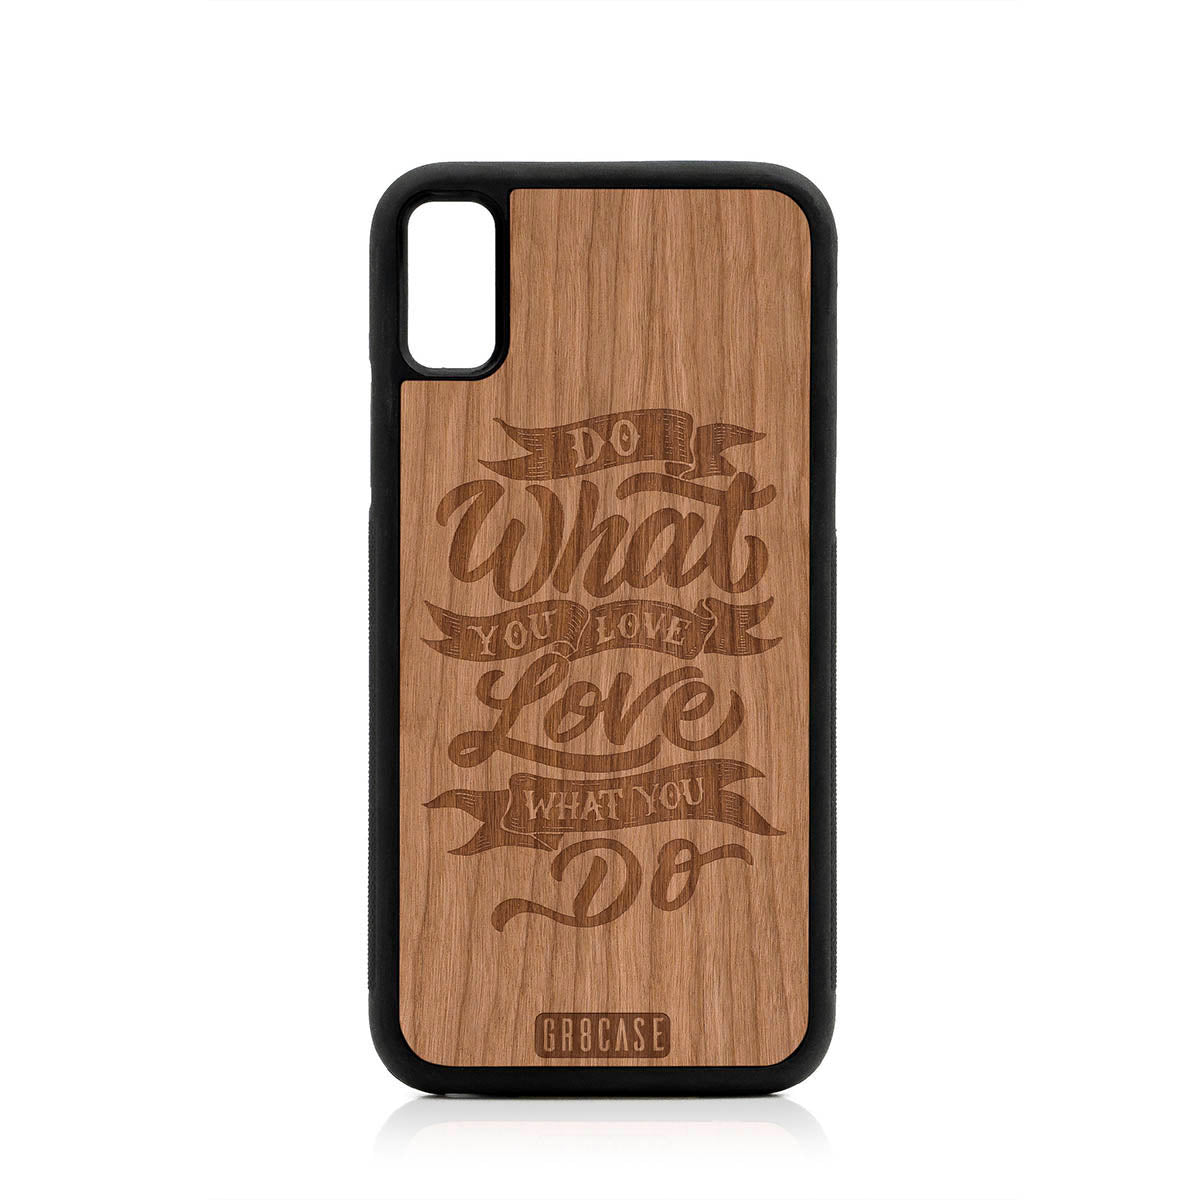 Do What You Love Love What You Do Design Wood Case For iPhone X/XS by GR8CASE